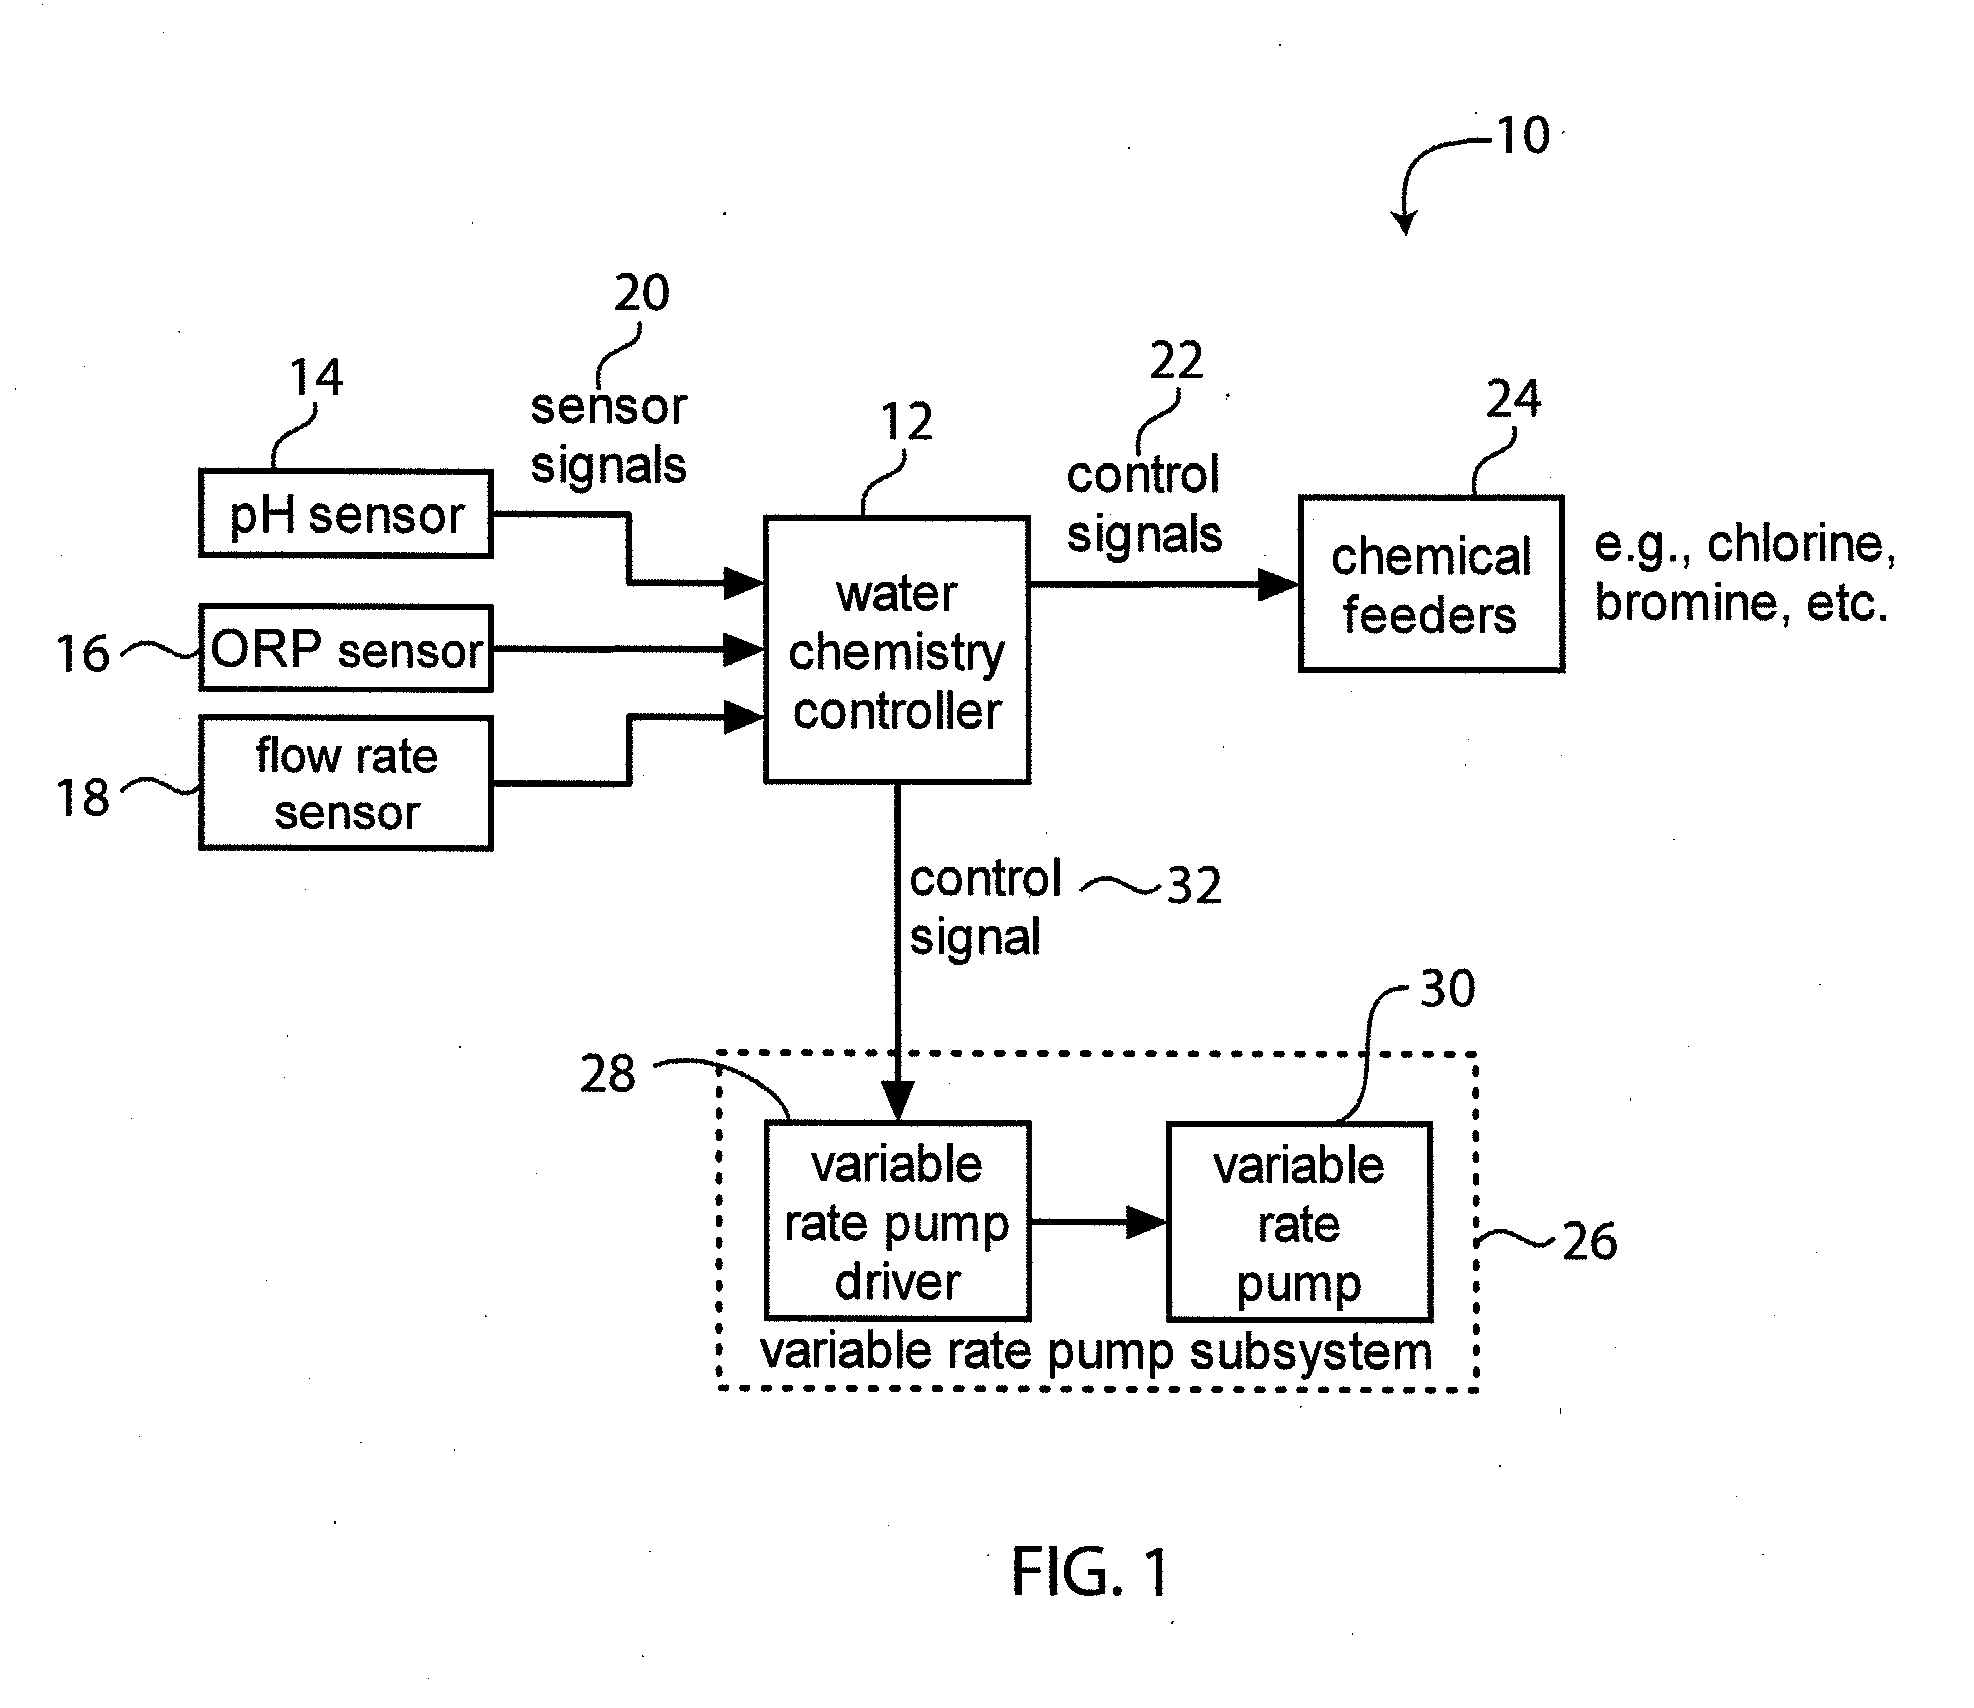 System for Controlling Water in an Aquatic Facility